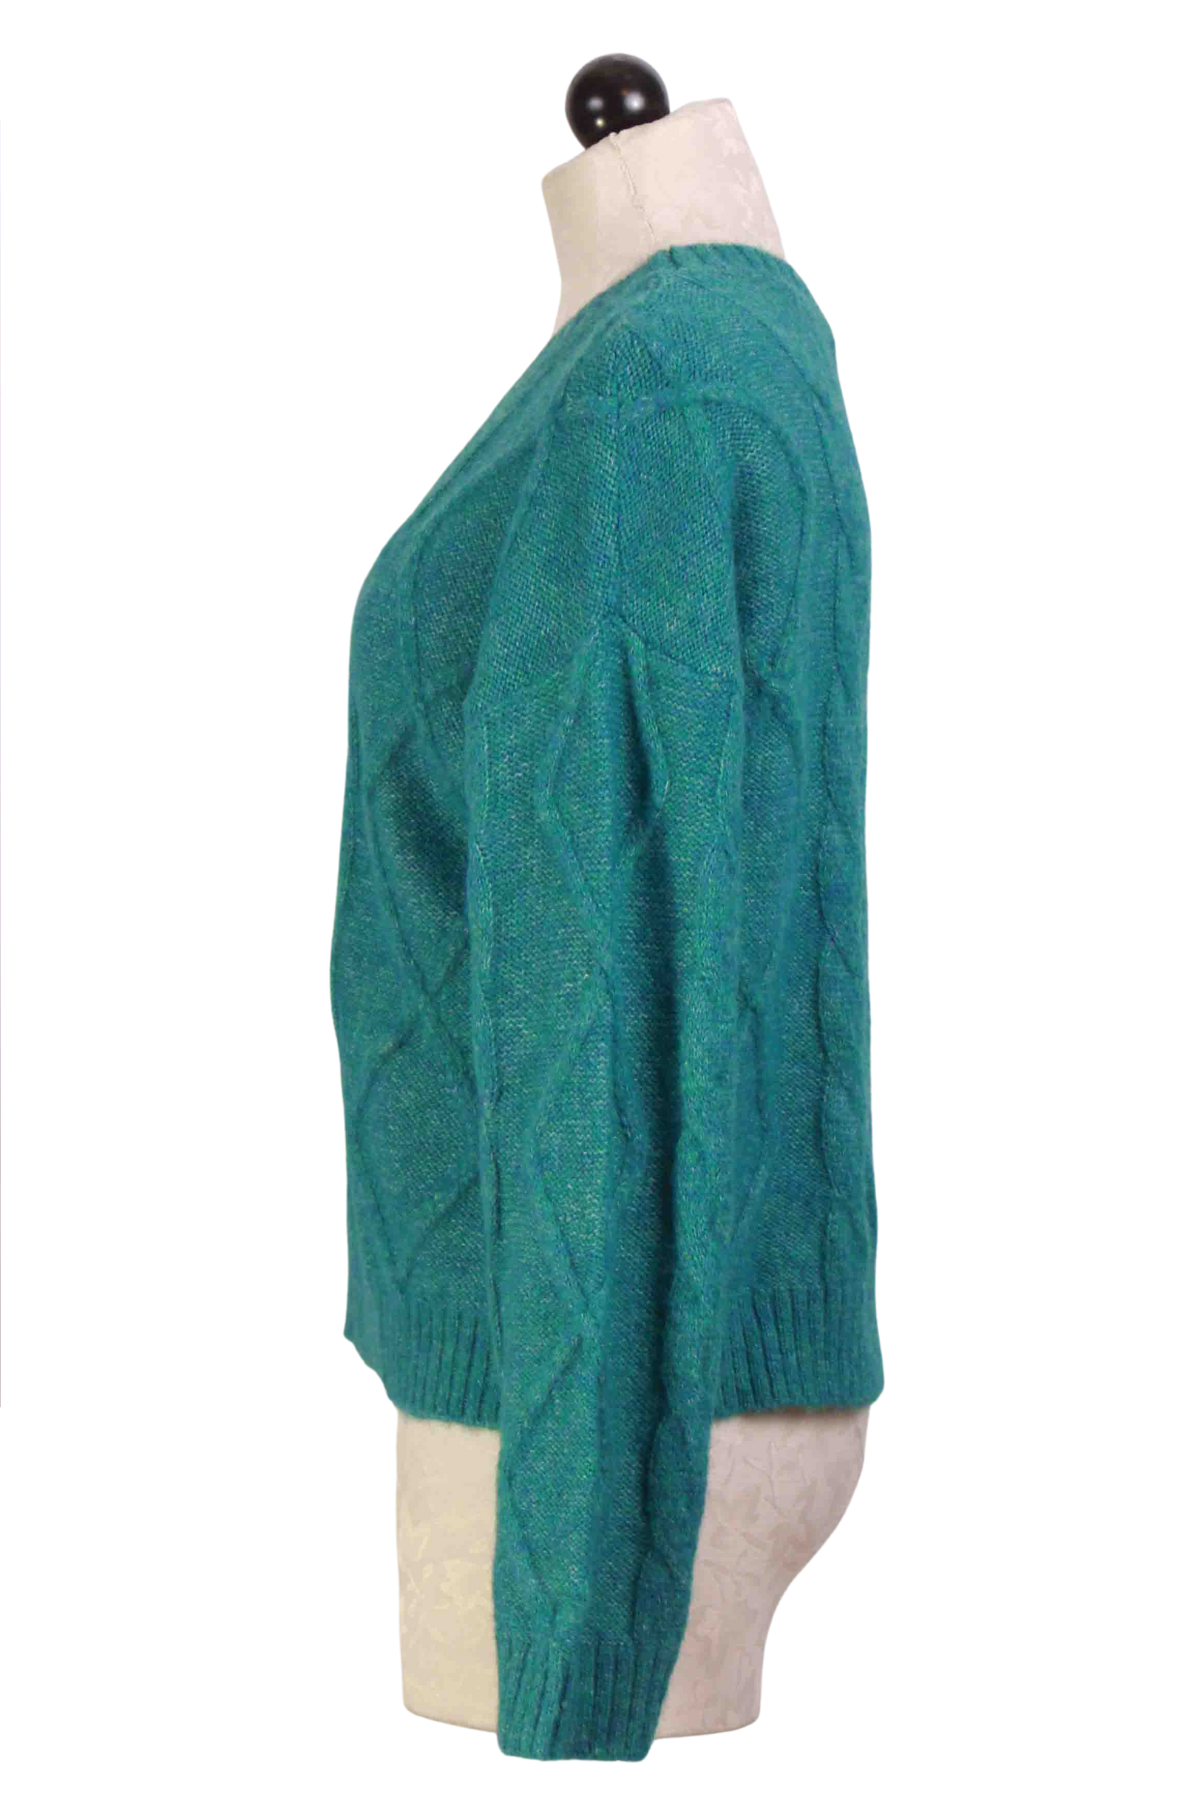 side view of Teal blue Cropped Cable Knit Pullover Sweater by Compania Fantastica